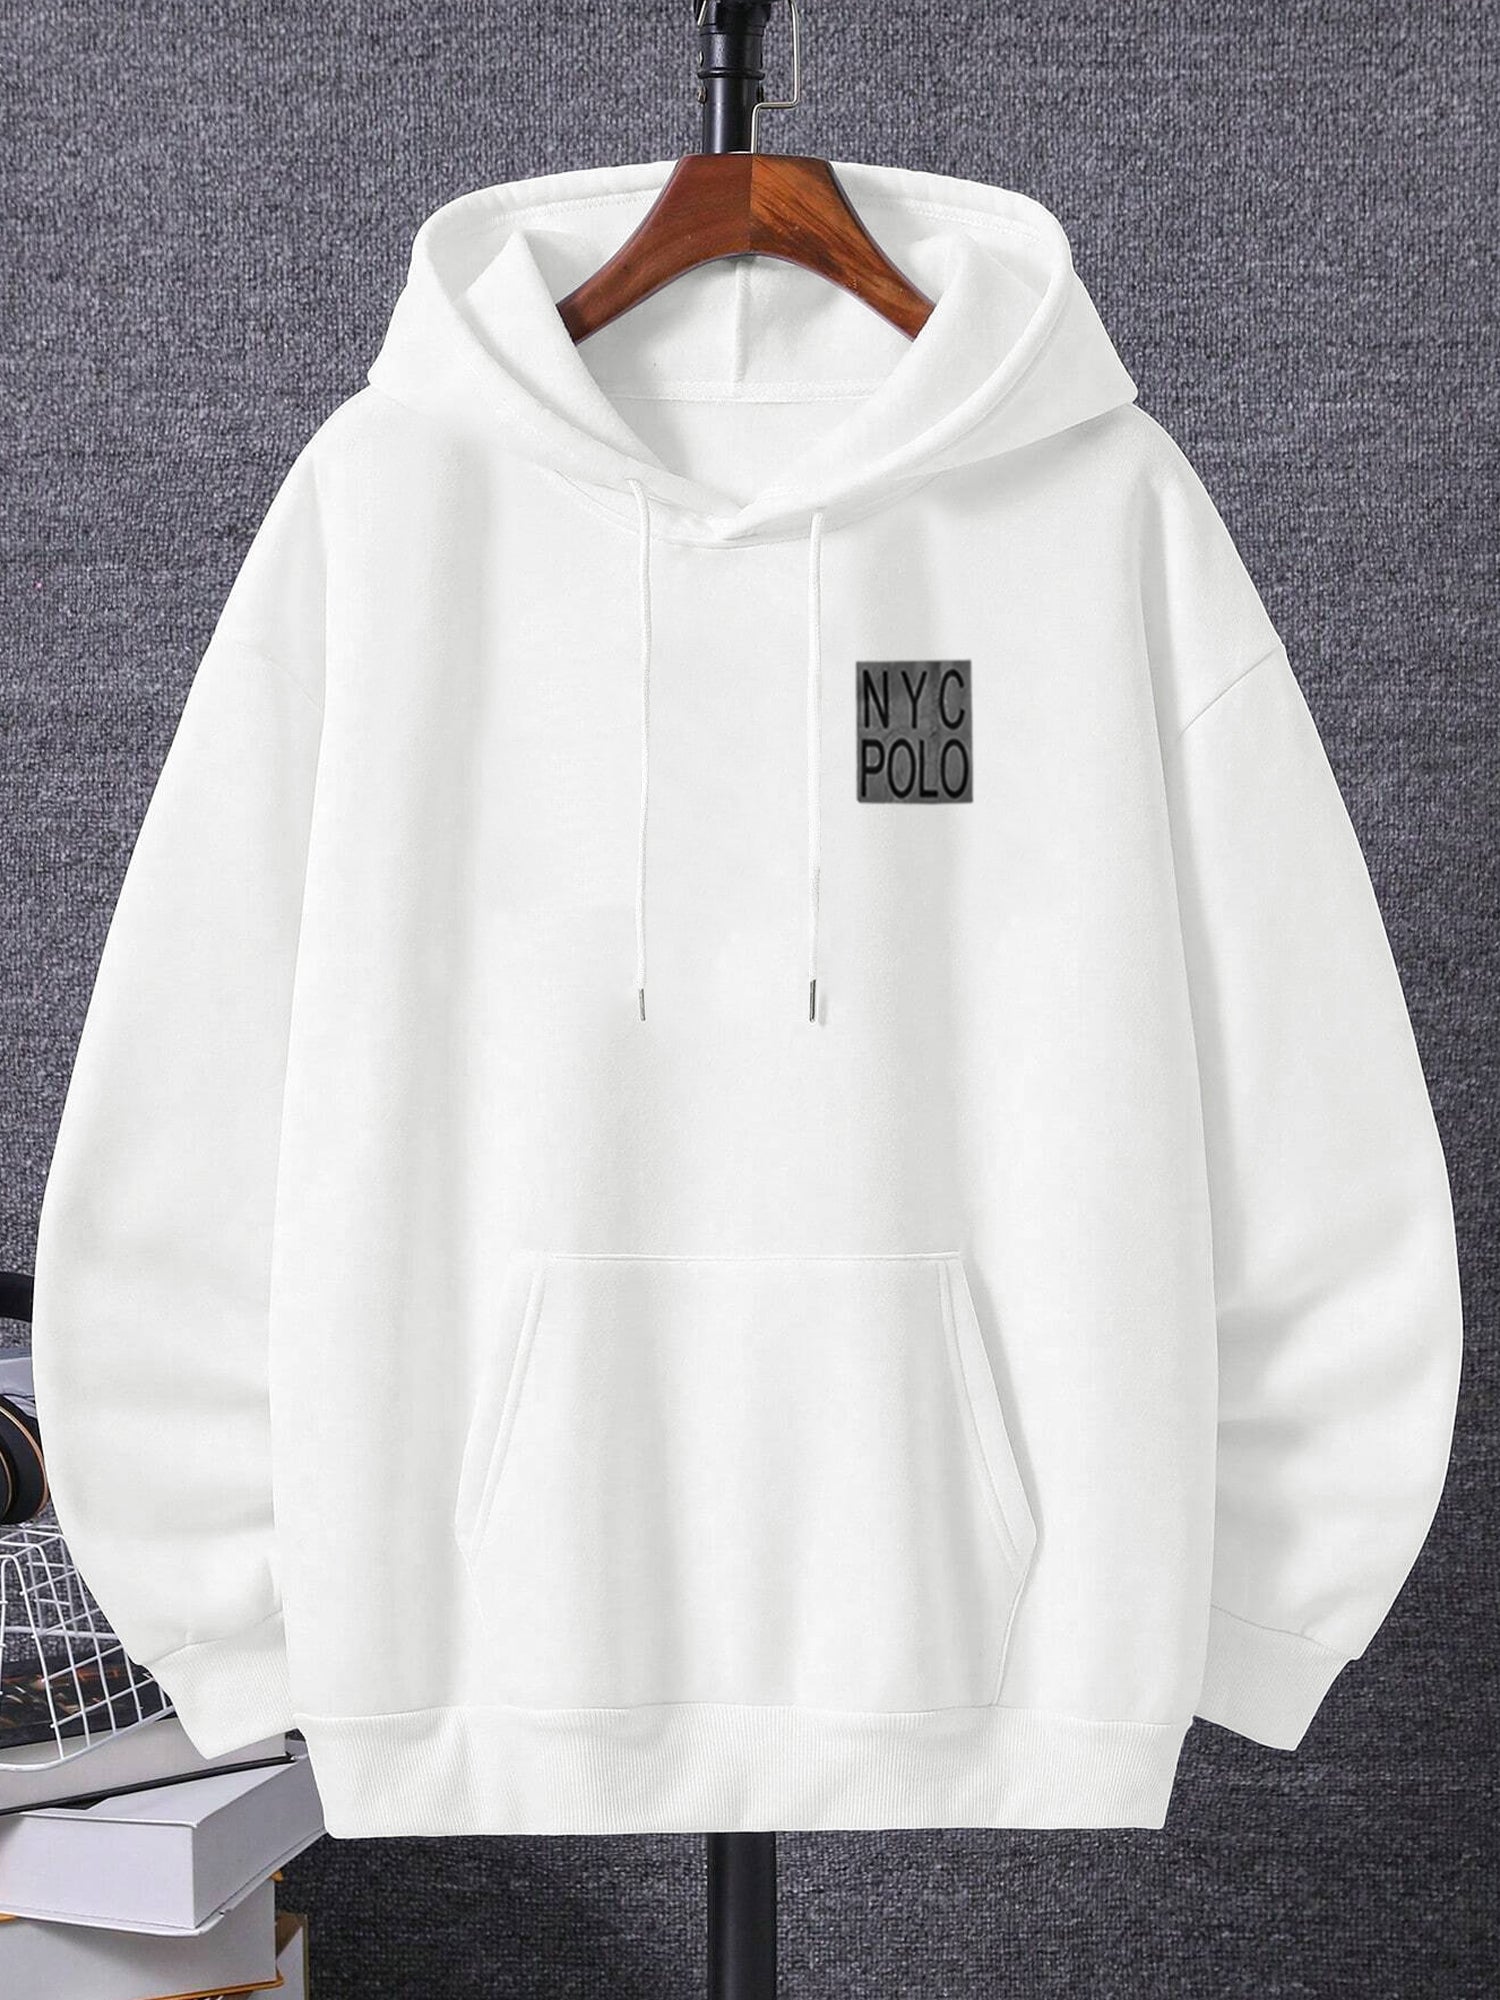 Nyc Polo Terry Fleece Pullover Hoodie For Men-White-SP1354